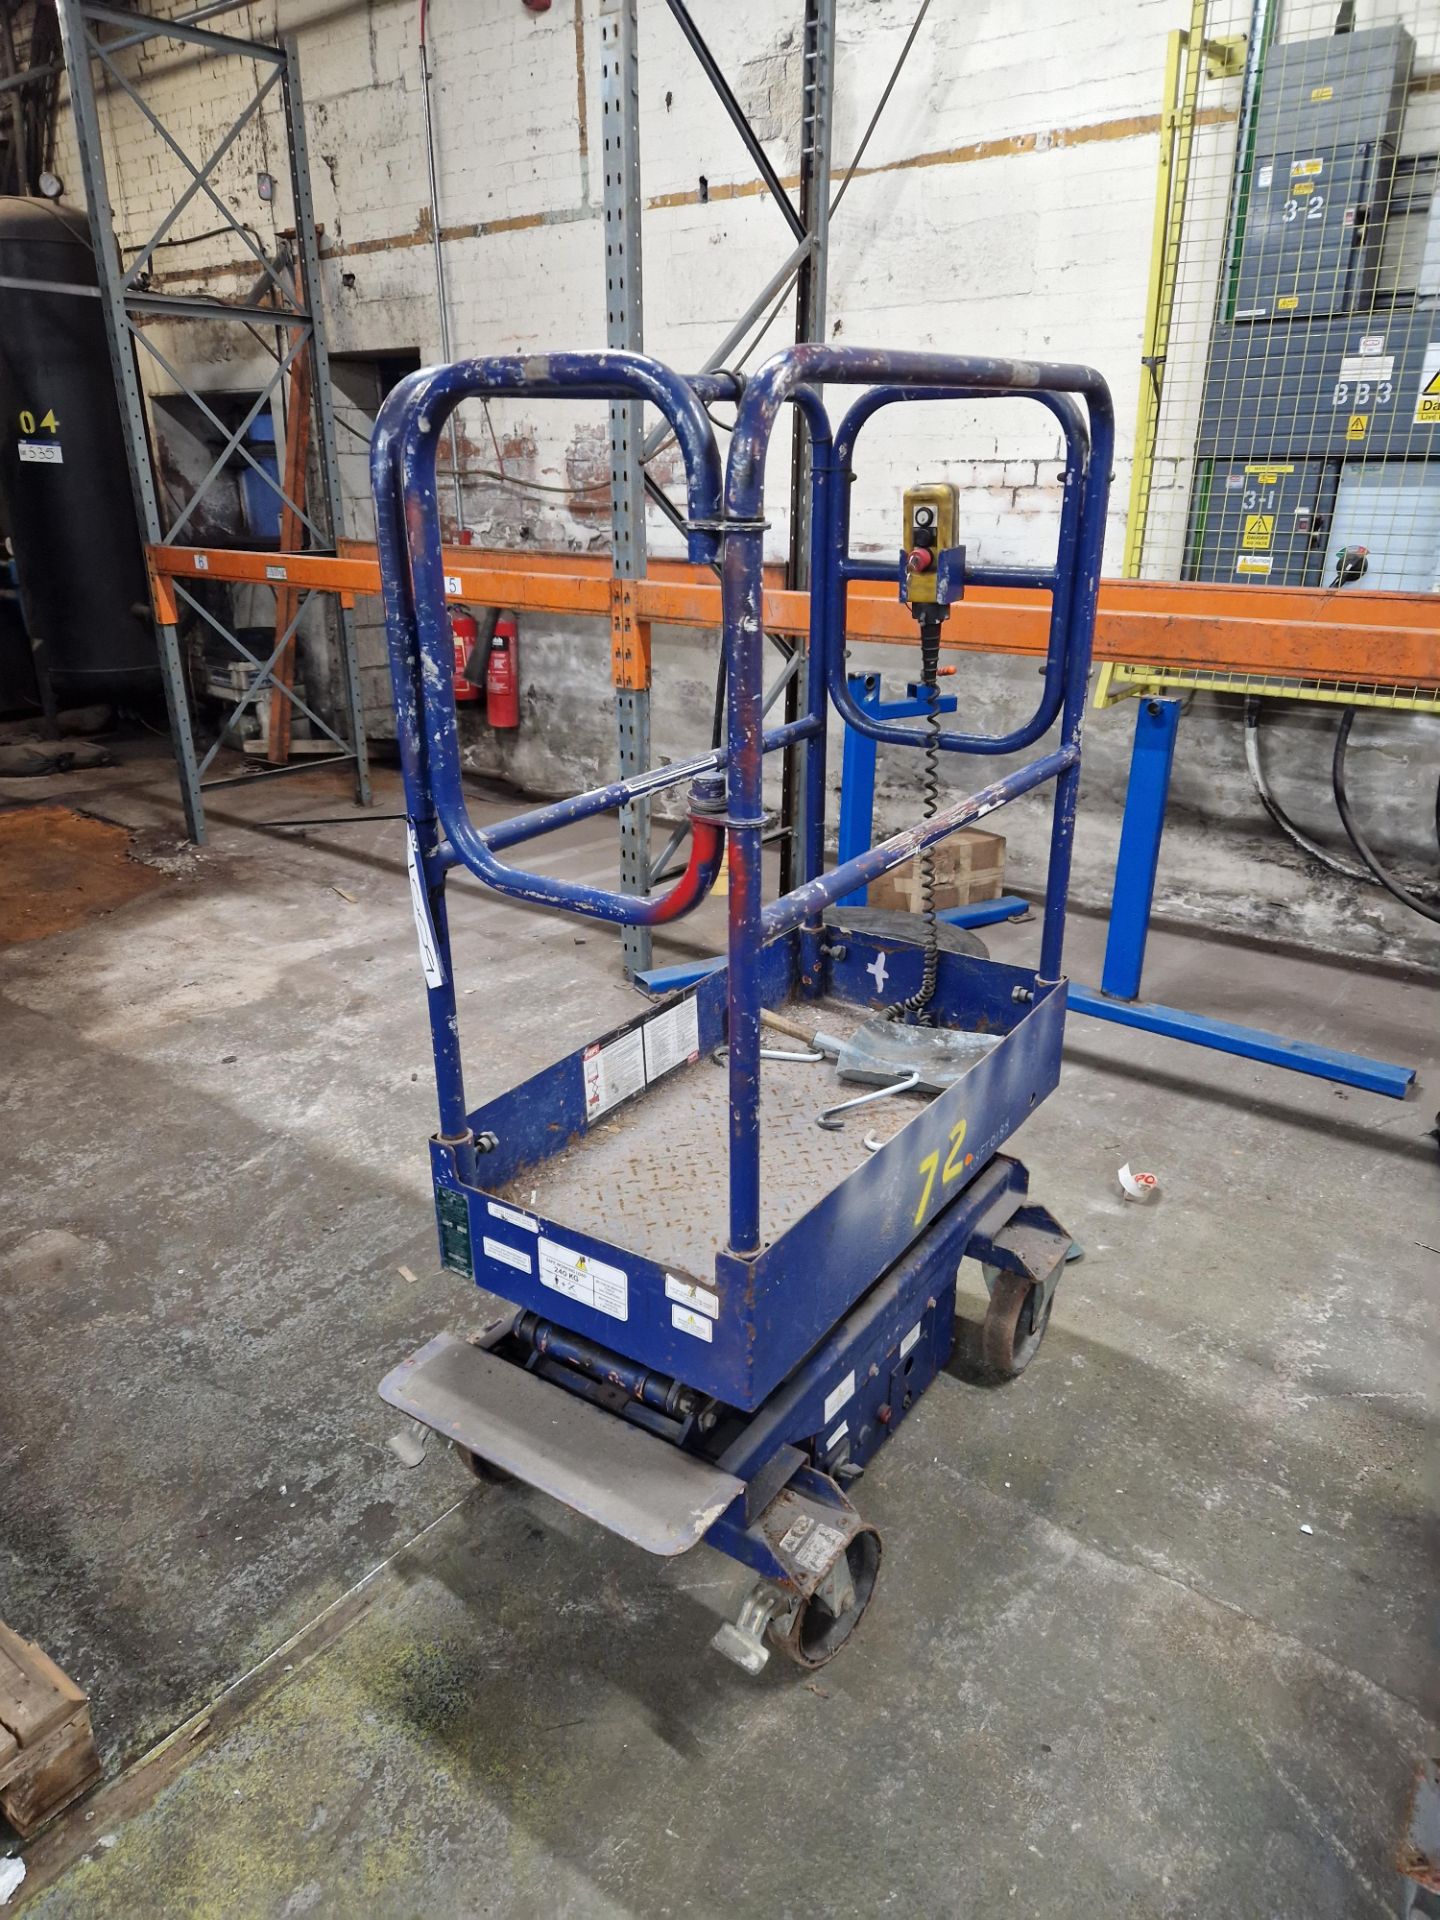 Pop Up Products Ltd POP-UP Access Lift, serial no. POP2611, YoM 2007, SWL 240kg Please read the